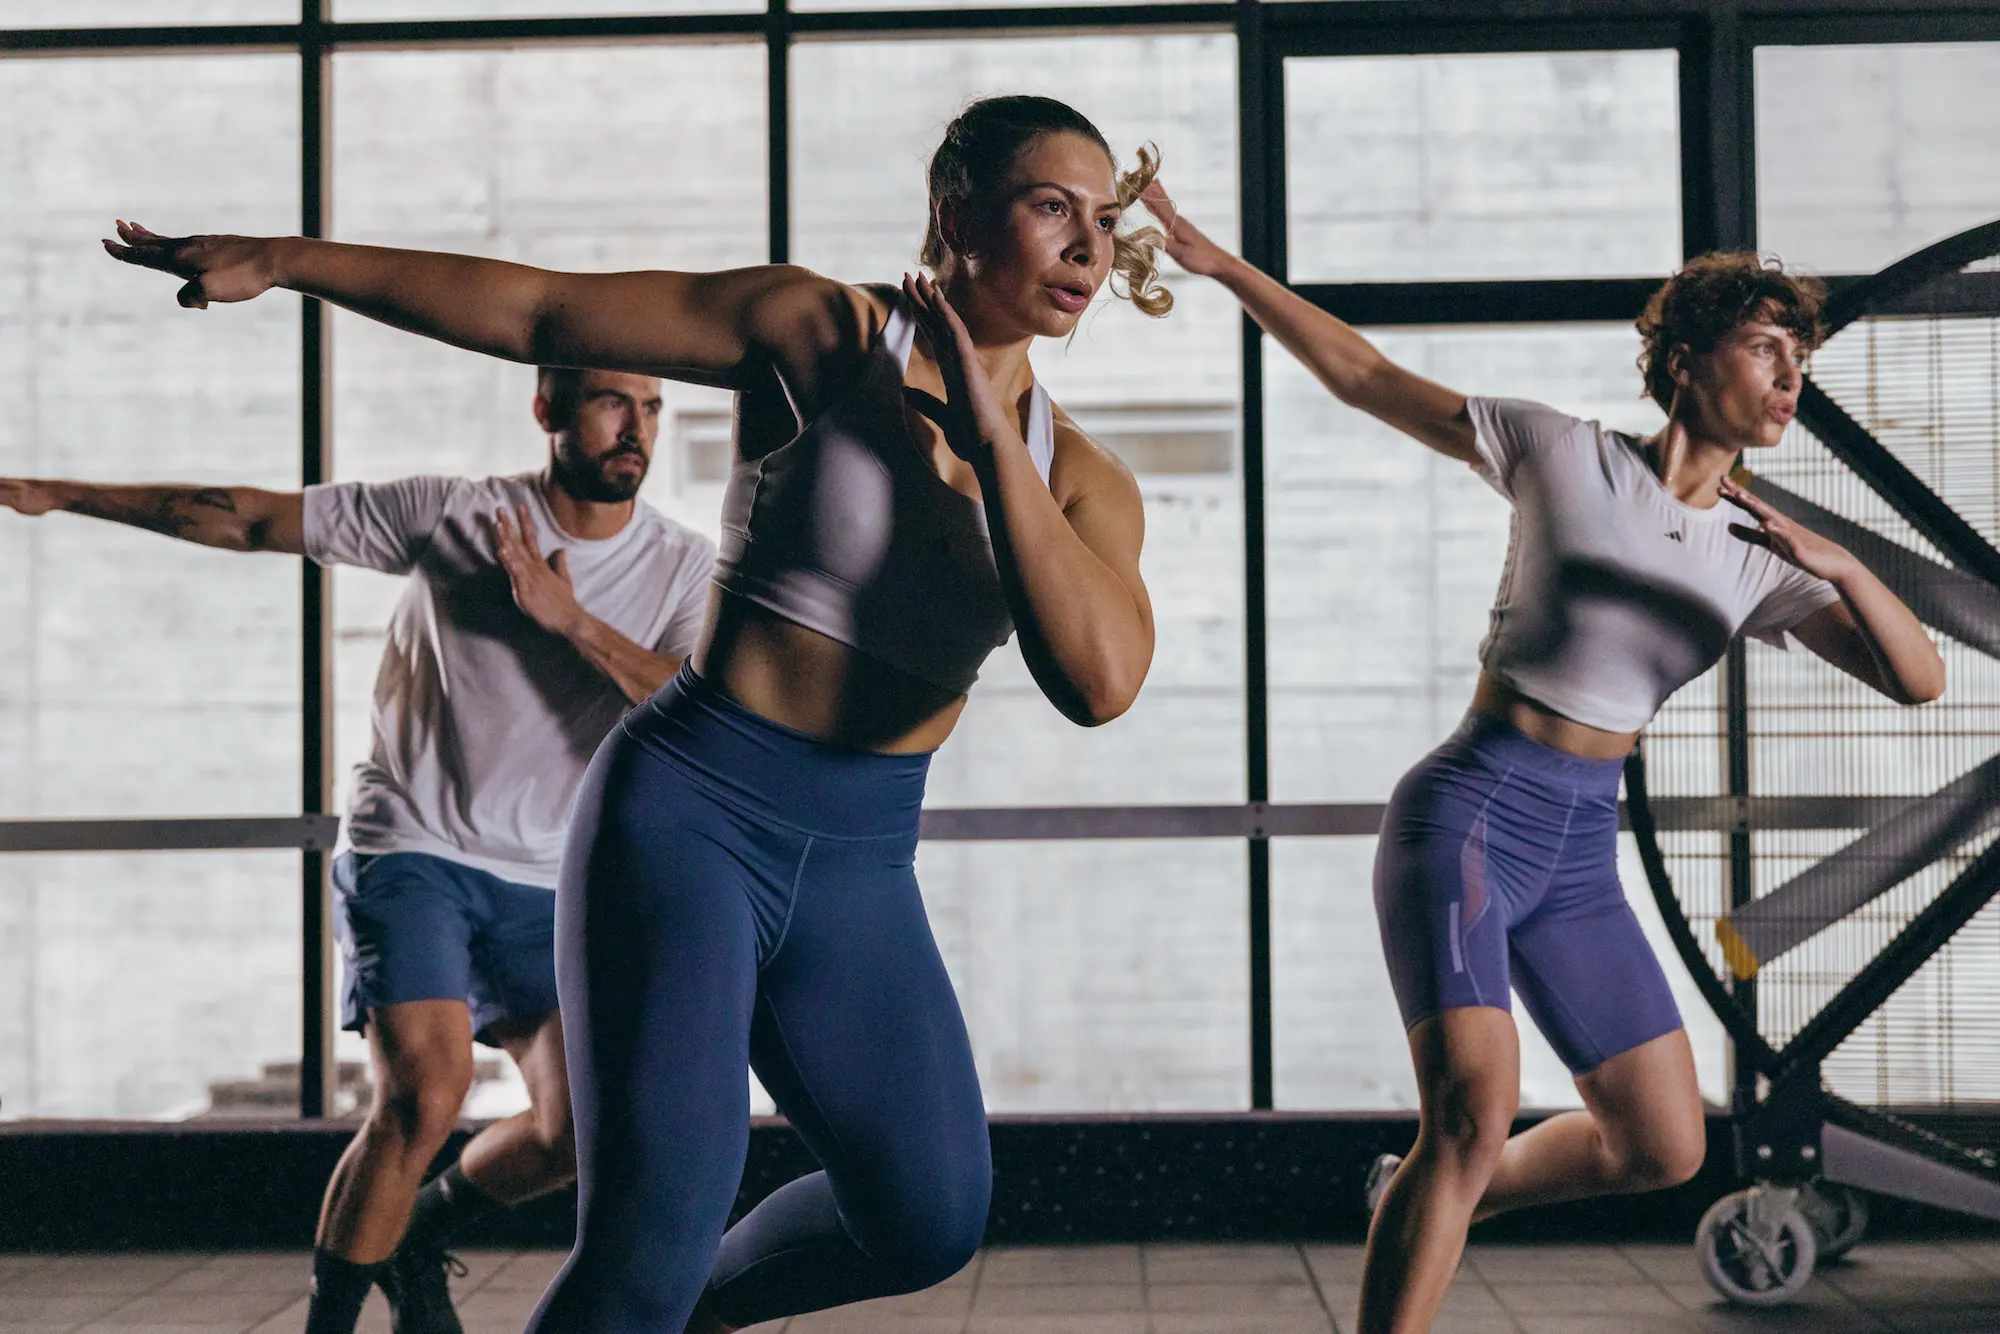 Les Mills US CEO Sean on 'Generation Active' - Athletech News